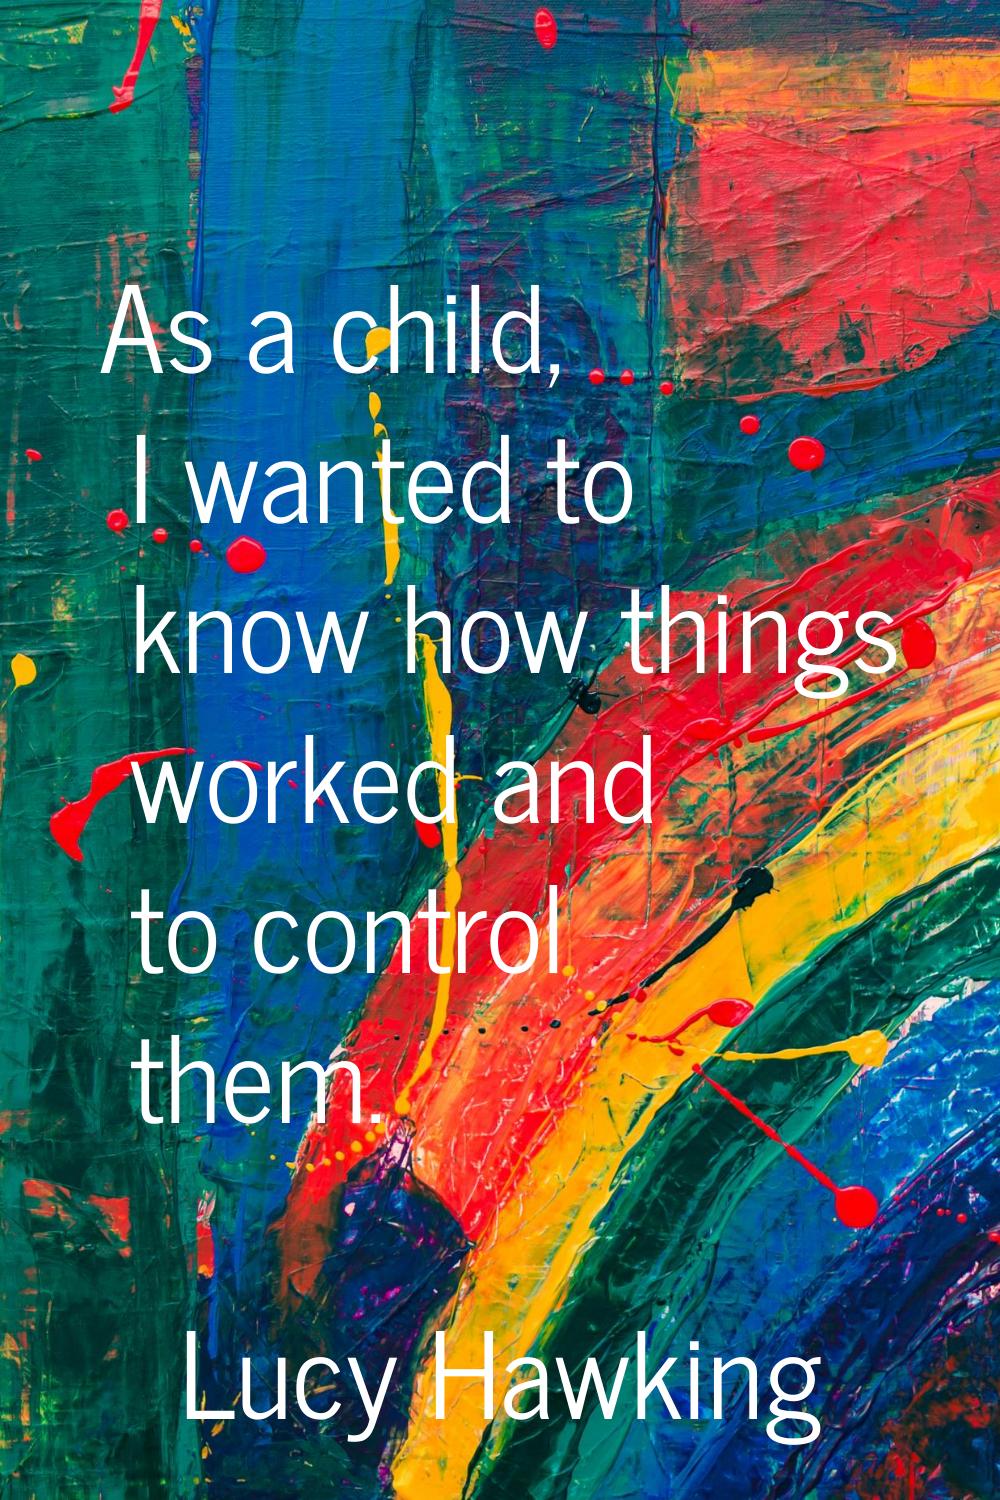 As a child, I wanted to know how things worked and to control them.